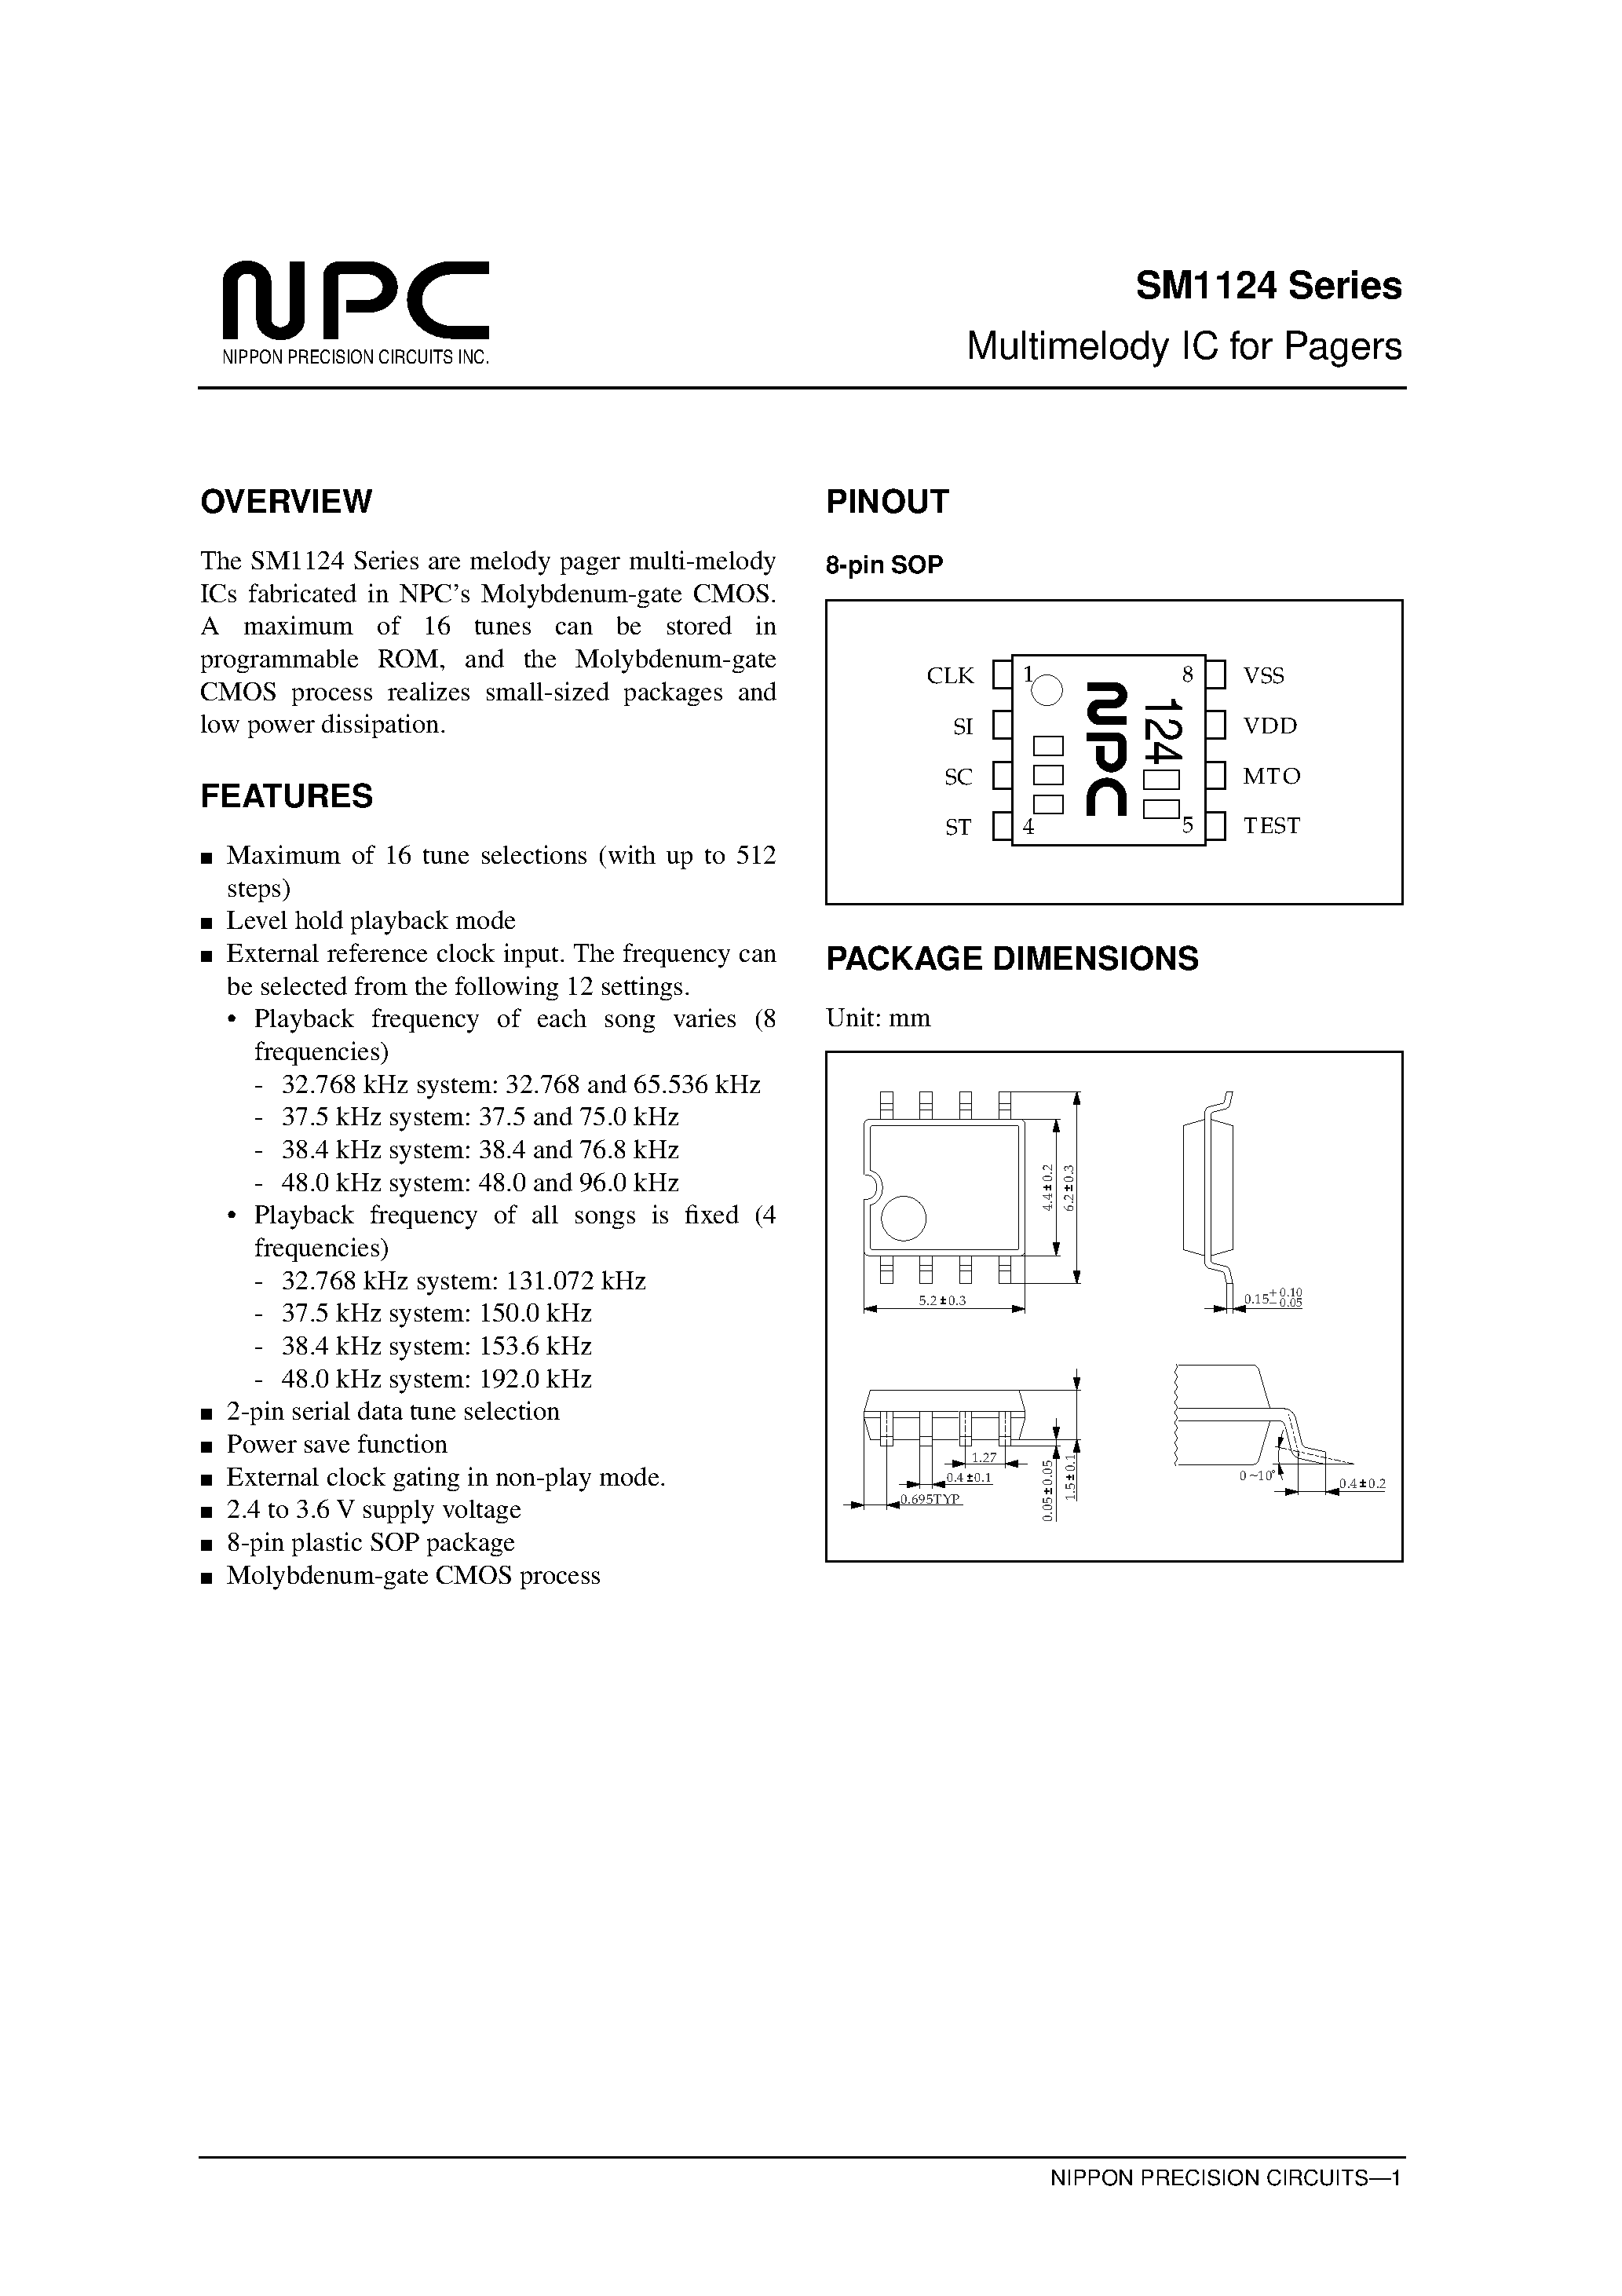 Даташит SM1124 - Multimelody IC for Pagers страница 1